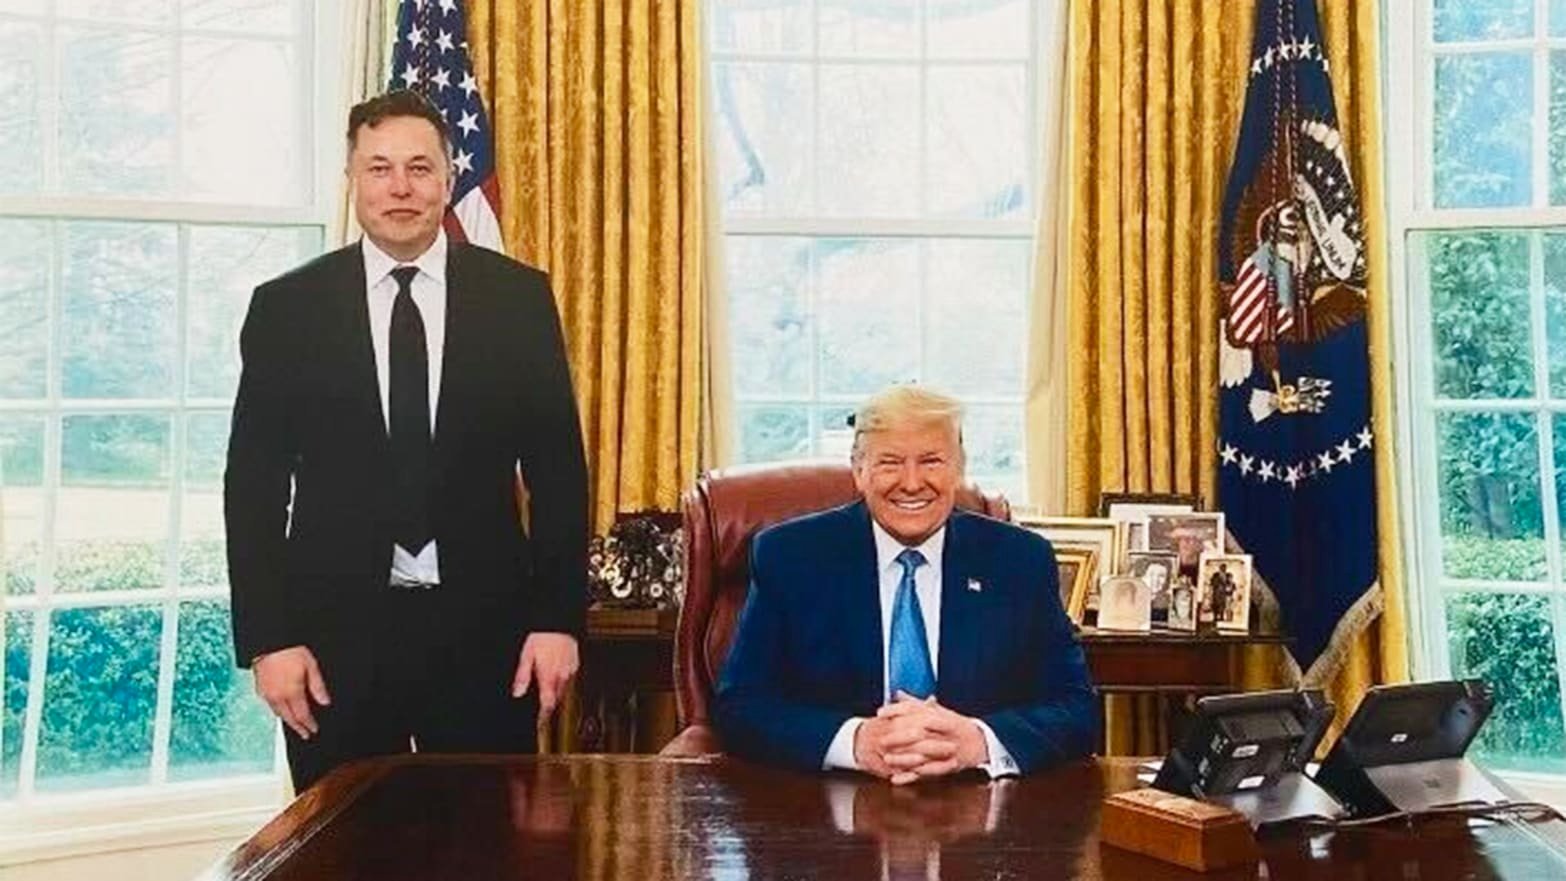 Elon Musk, who relies on China as a core market for his business empire, has pledged to support Trump’s campaign, creating a complicated and geopolitically entangled path to these ambitions. Photo: @realDonaldTrump/Truth Social